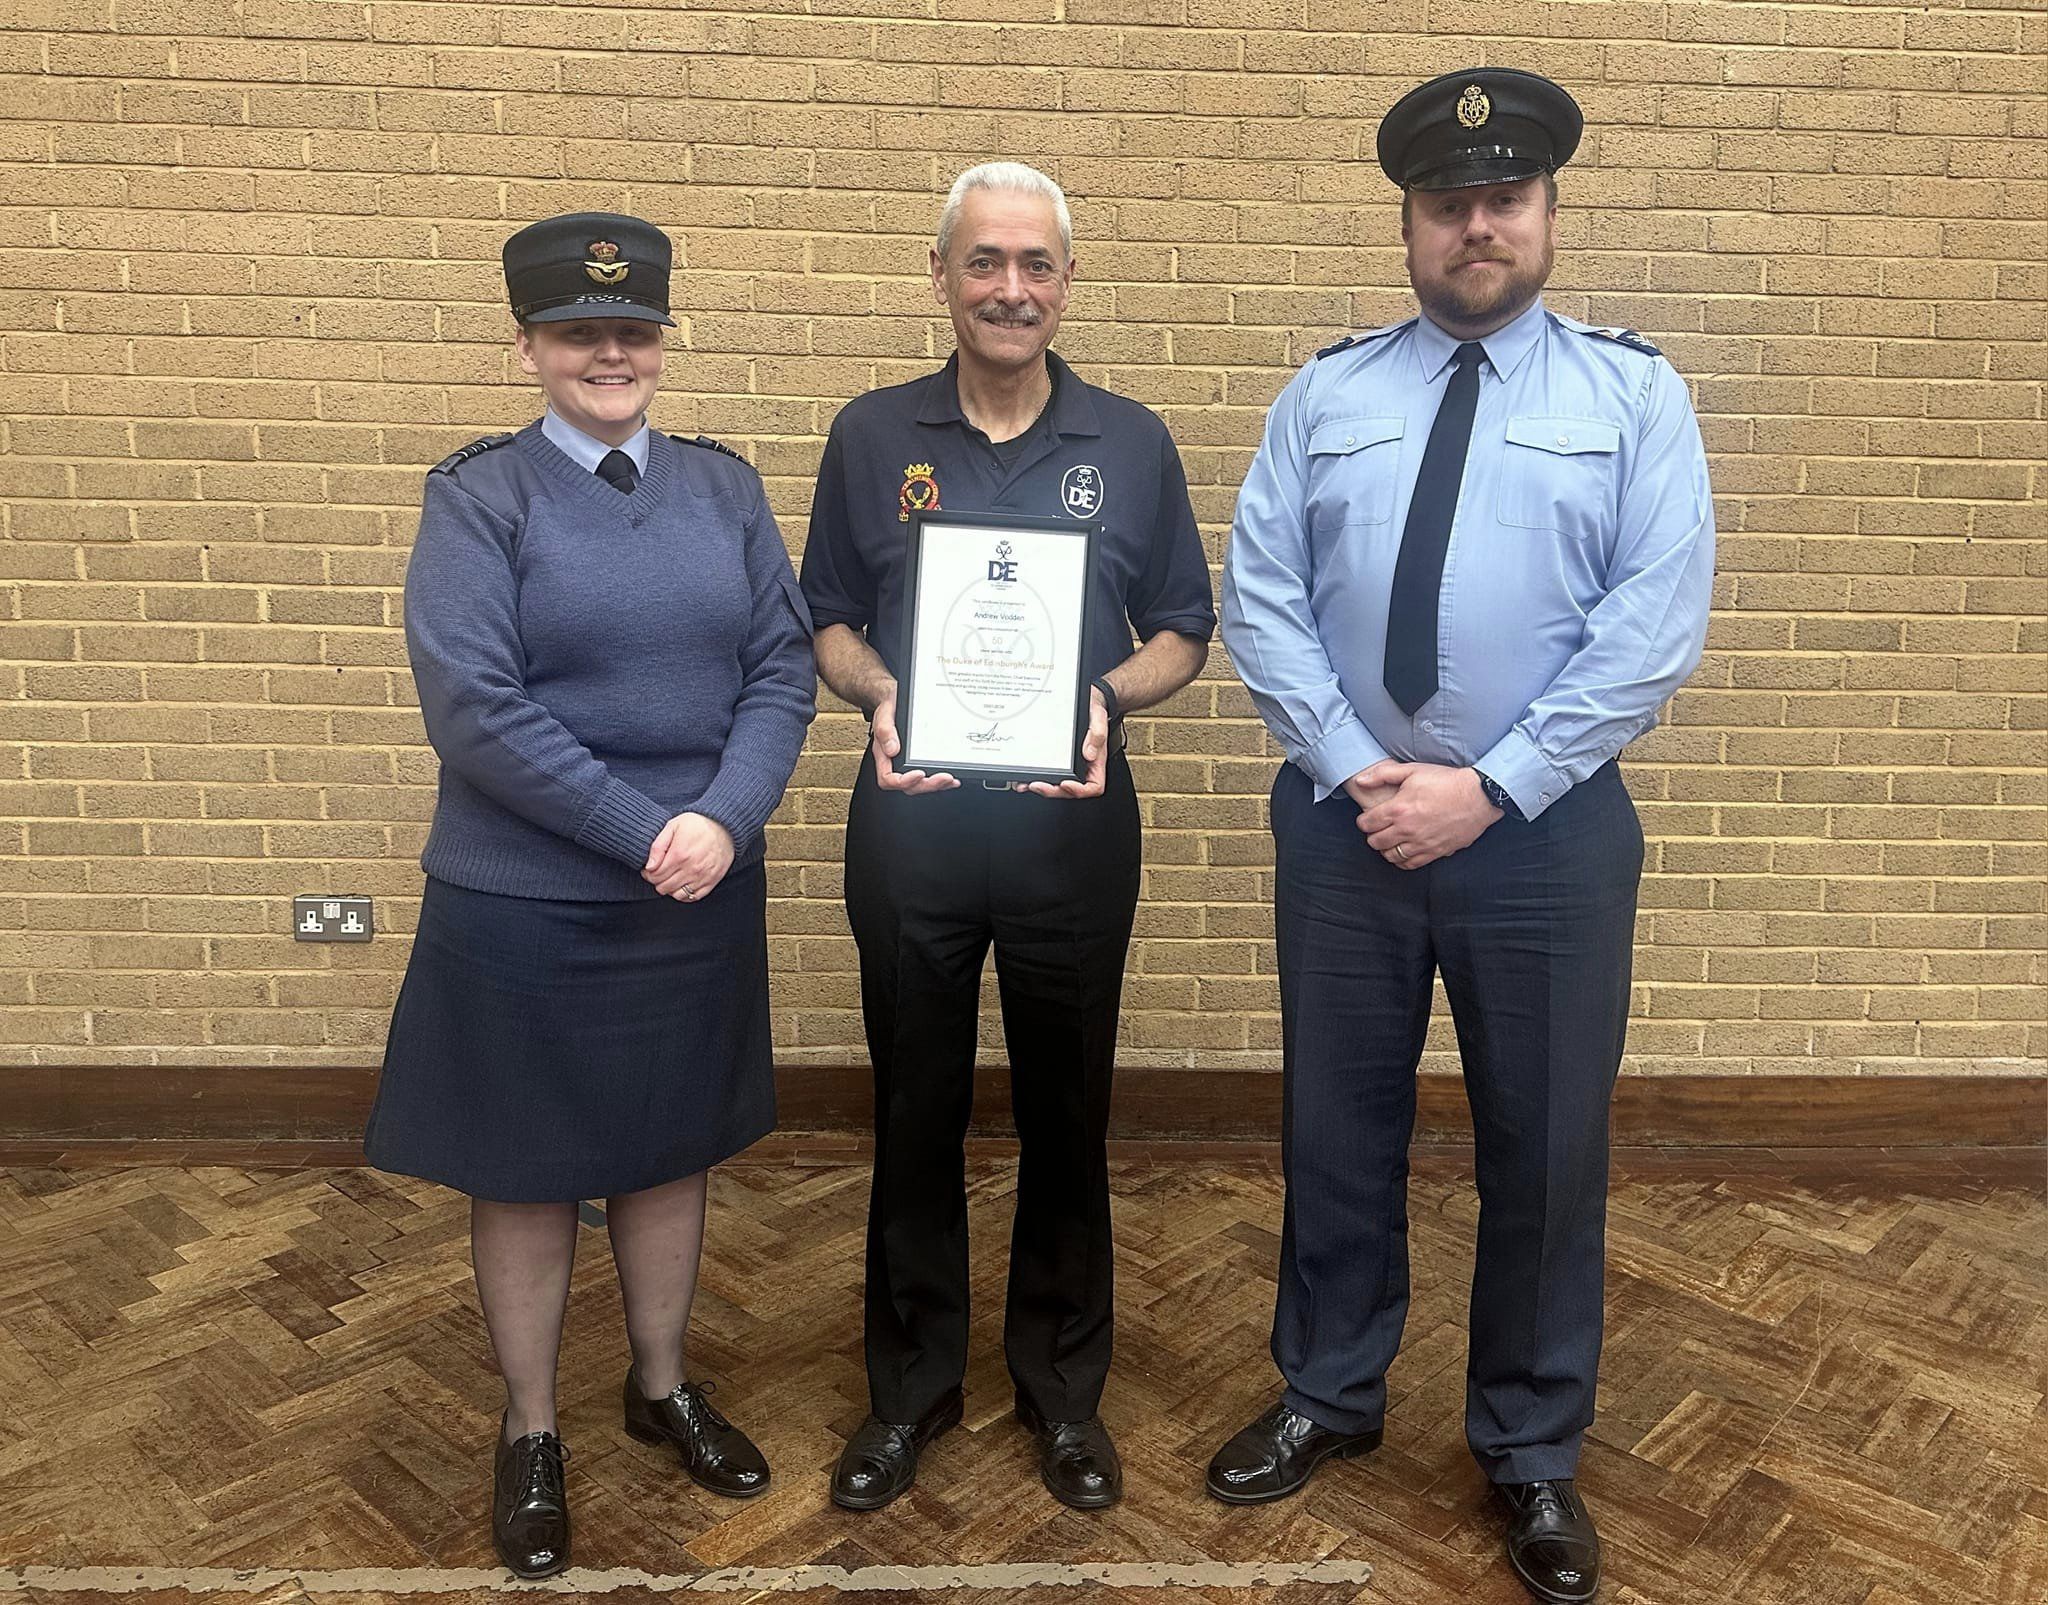 Andy been presented with his certificate by Sector Commander, Squadron Leader Kara Oliver, and the Wing Duke of Edinburgh Award Officer, Sergeant John Oliver.